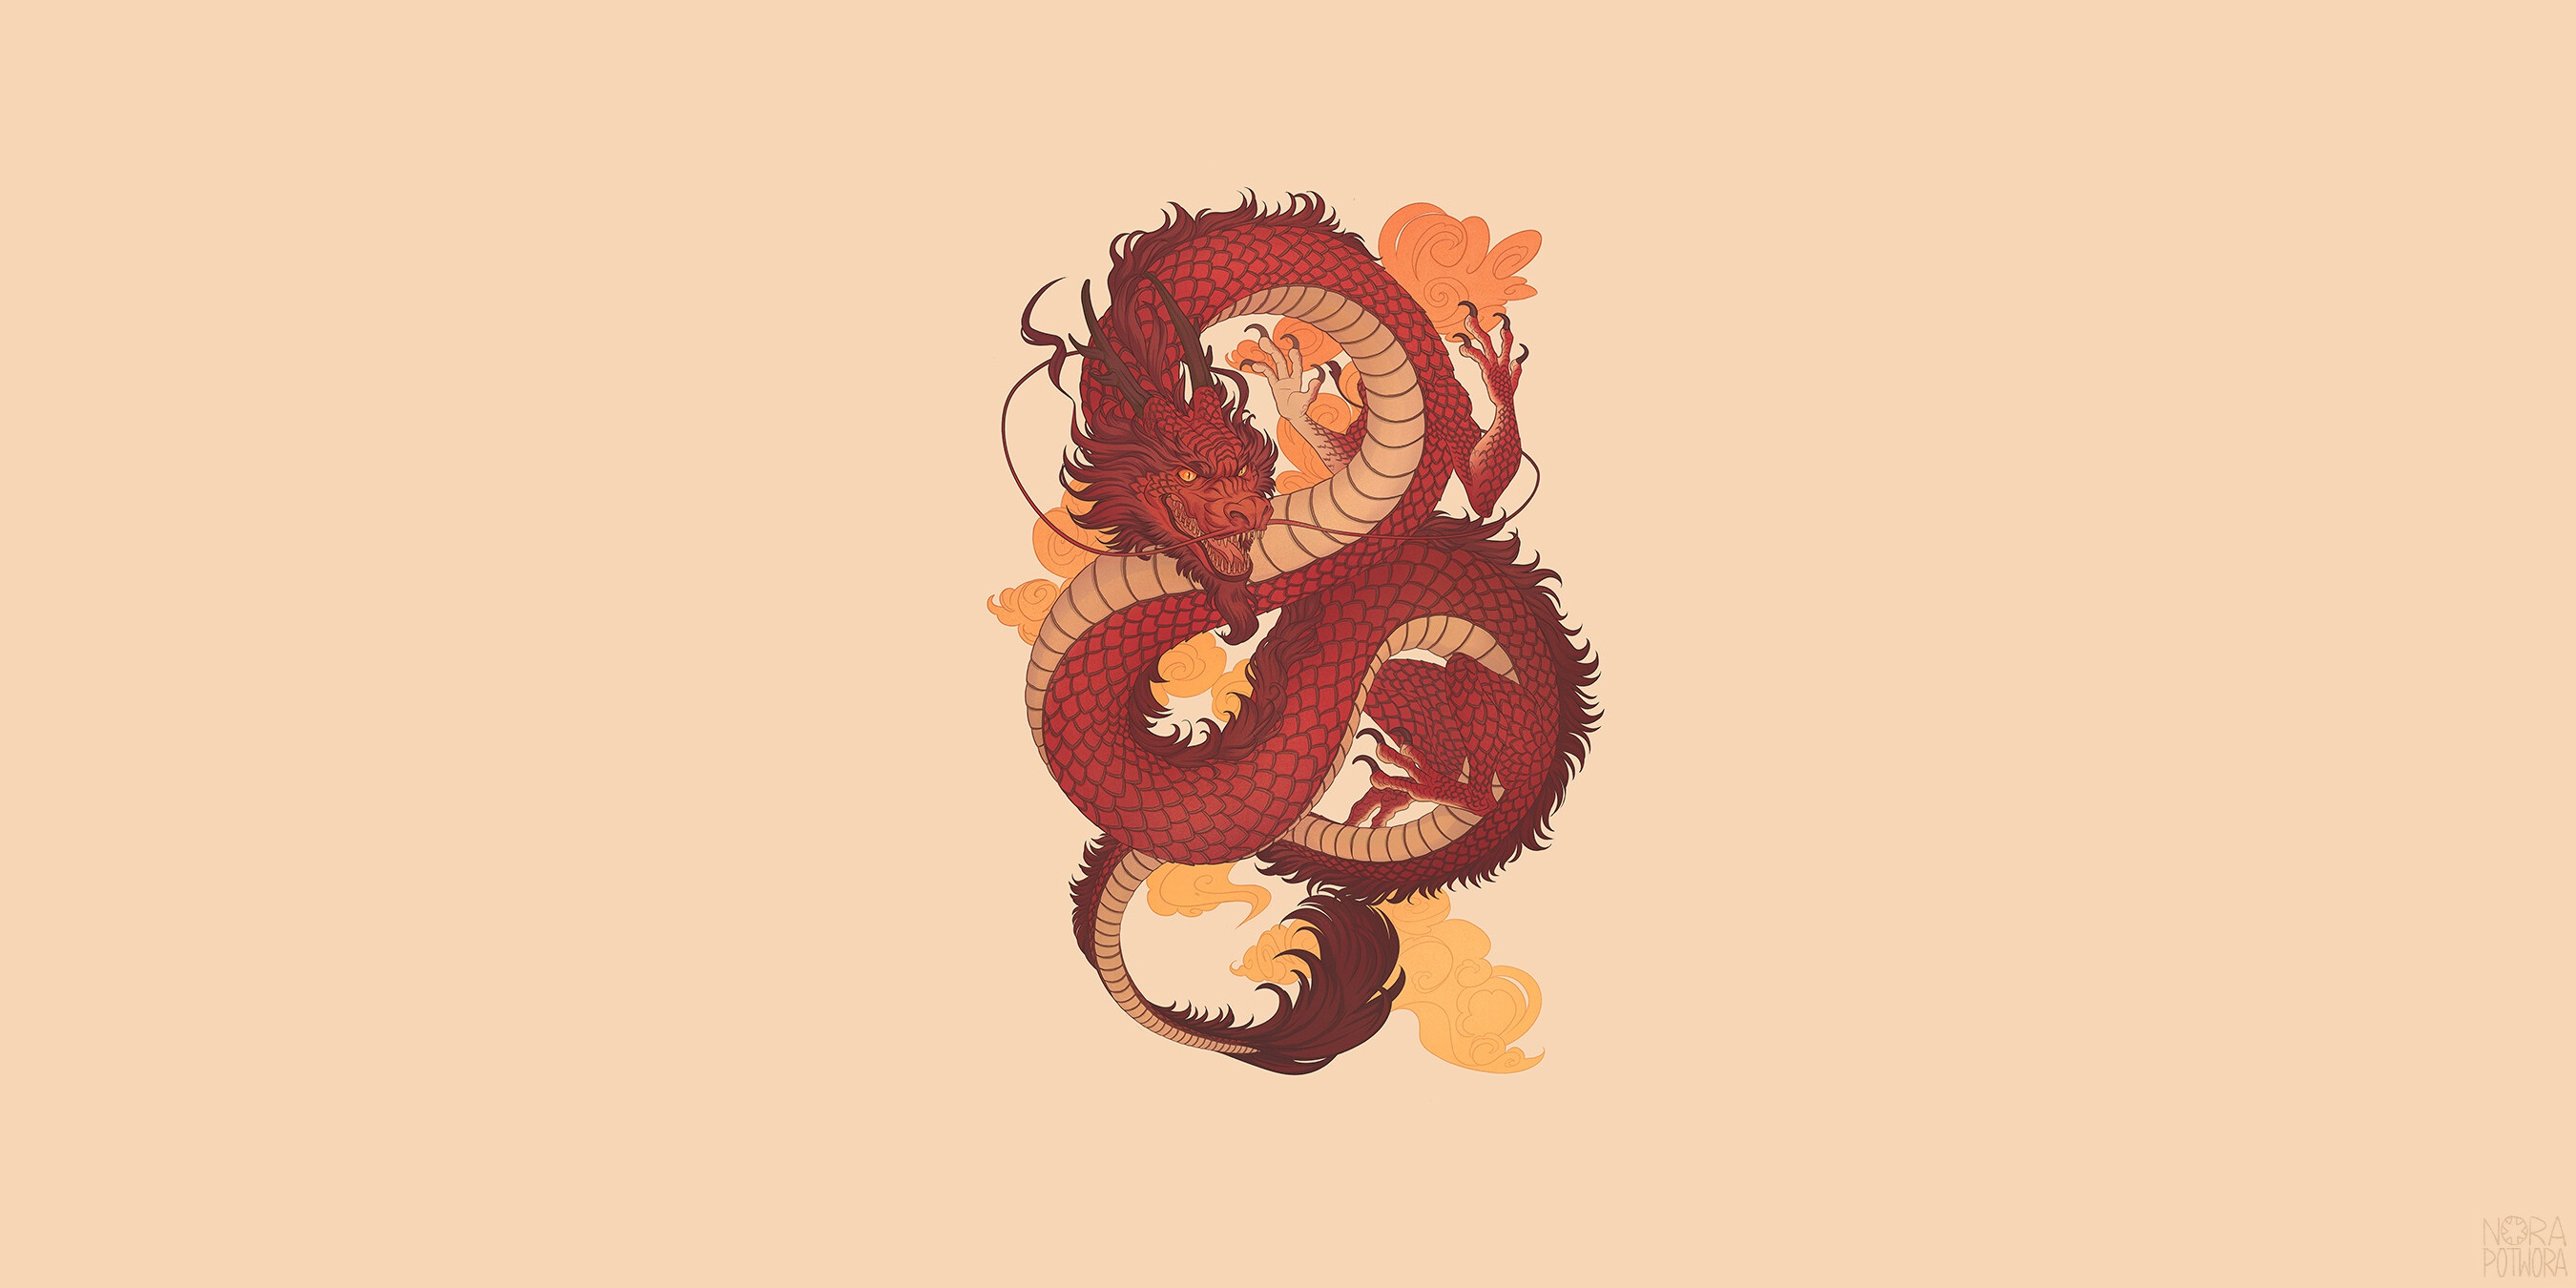 Chinese dragon minimal wallpaper Resolution 2700x1350 | Best Download this awesome wallpaper - Cool Wallpaper HD - CoolWallpaper-HD.com